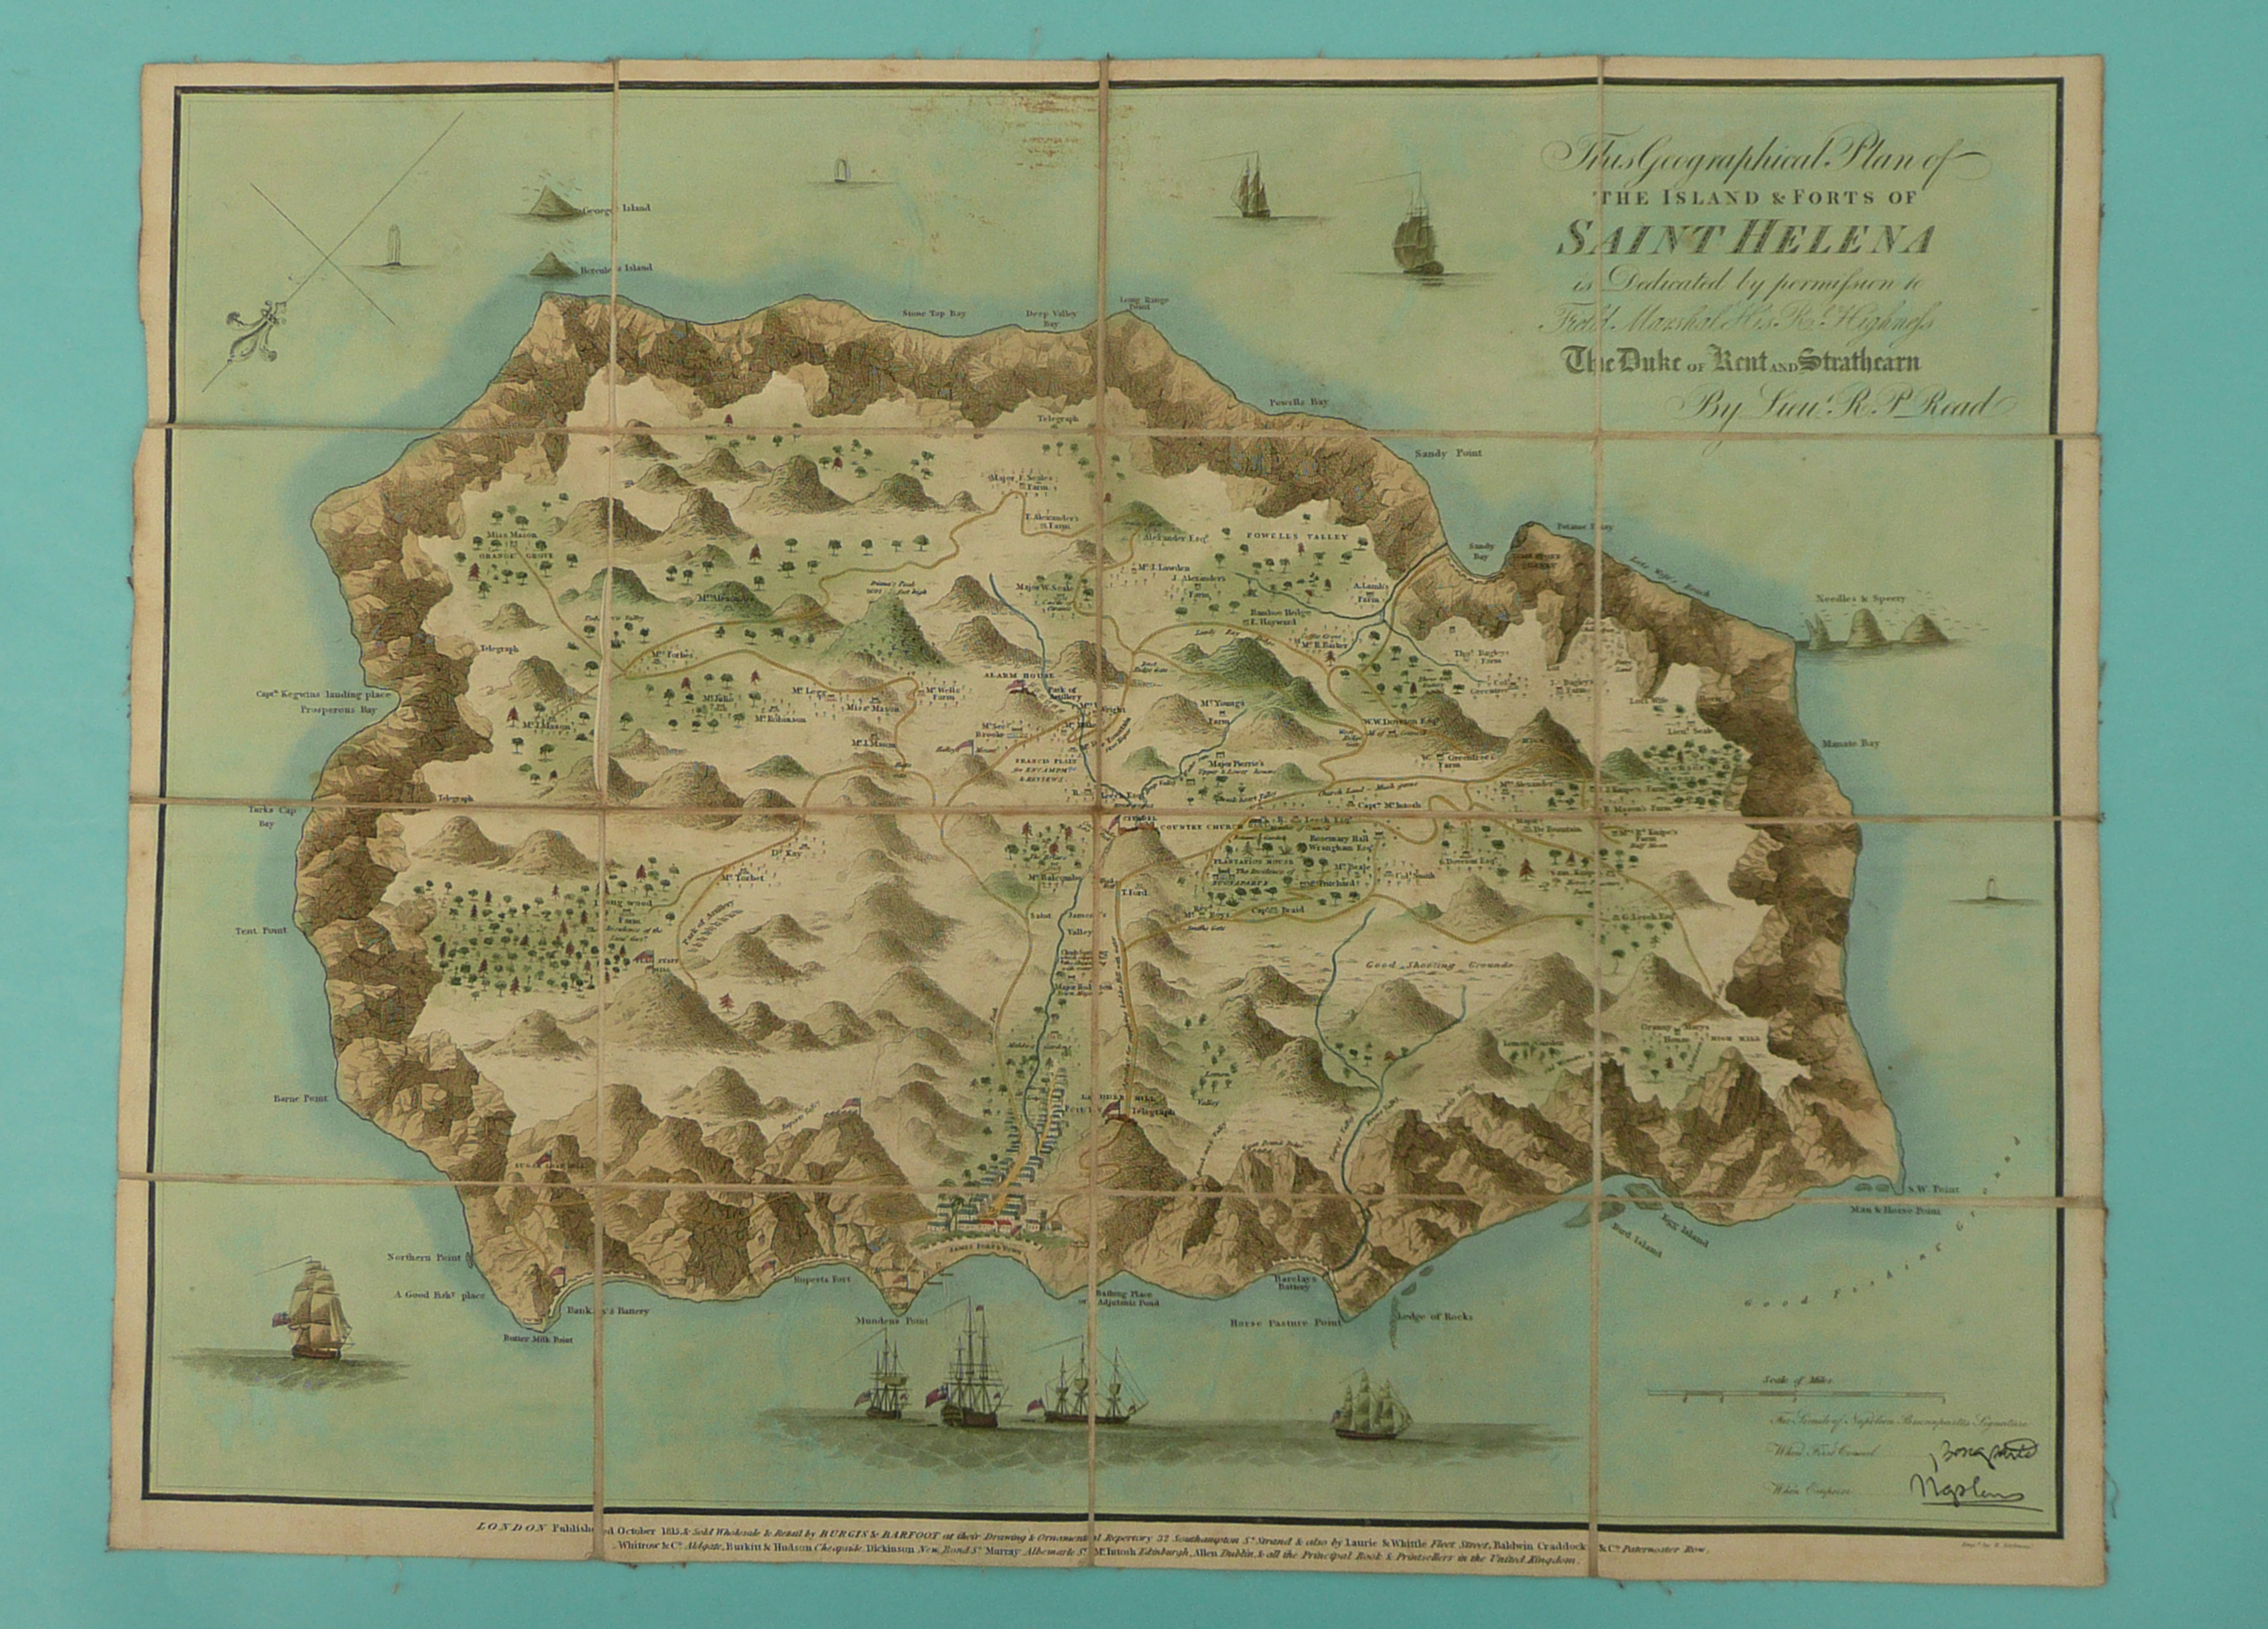 Napoleon Bonaparte: a rare folding hand coloured map of ‘The Island & Fort of St Helena’ by Lieut